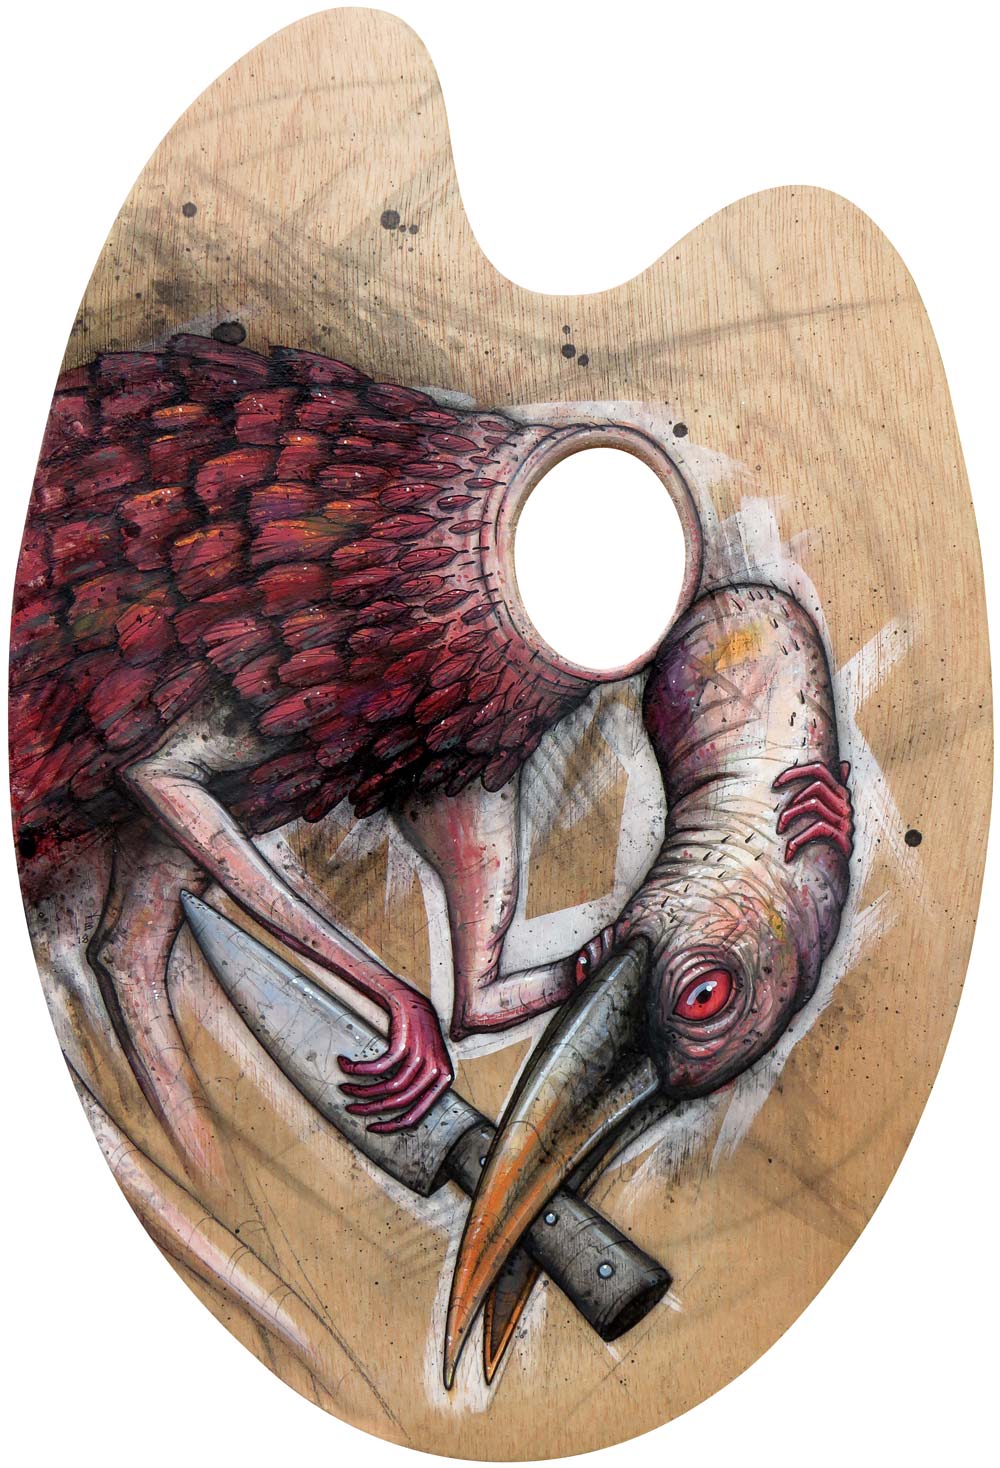 A bird-like creature with hands holds its own severed head and a knife